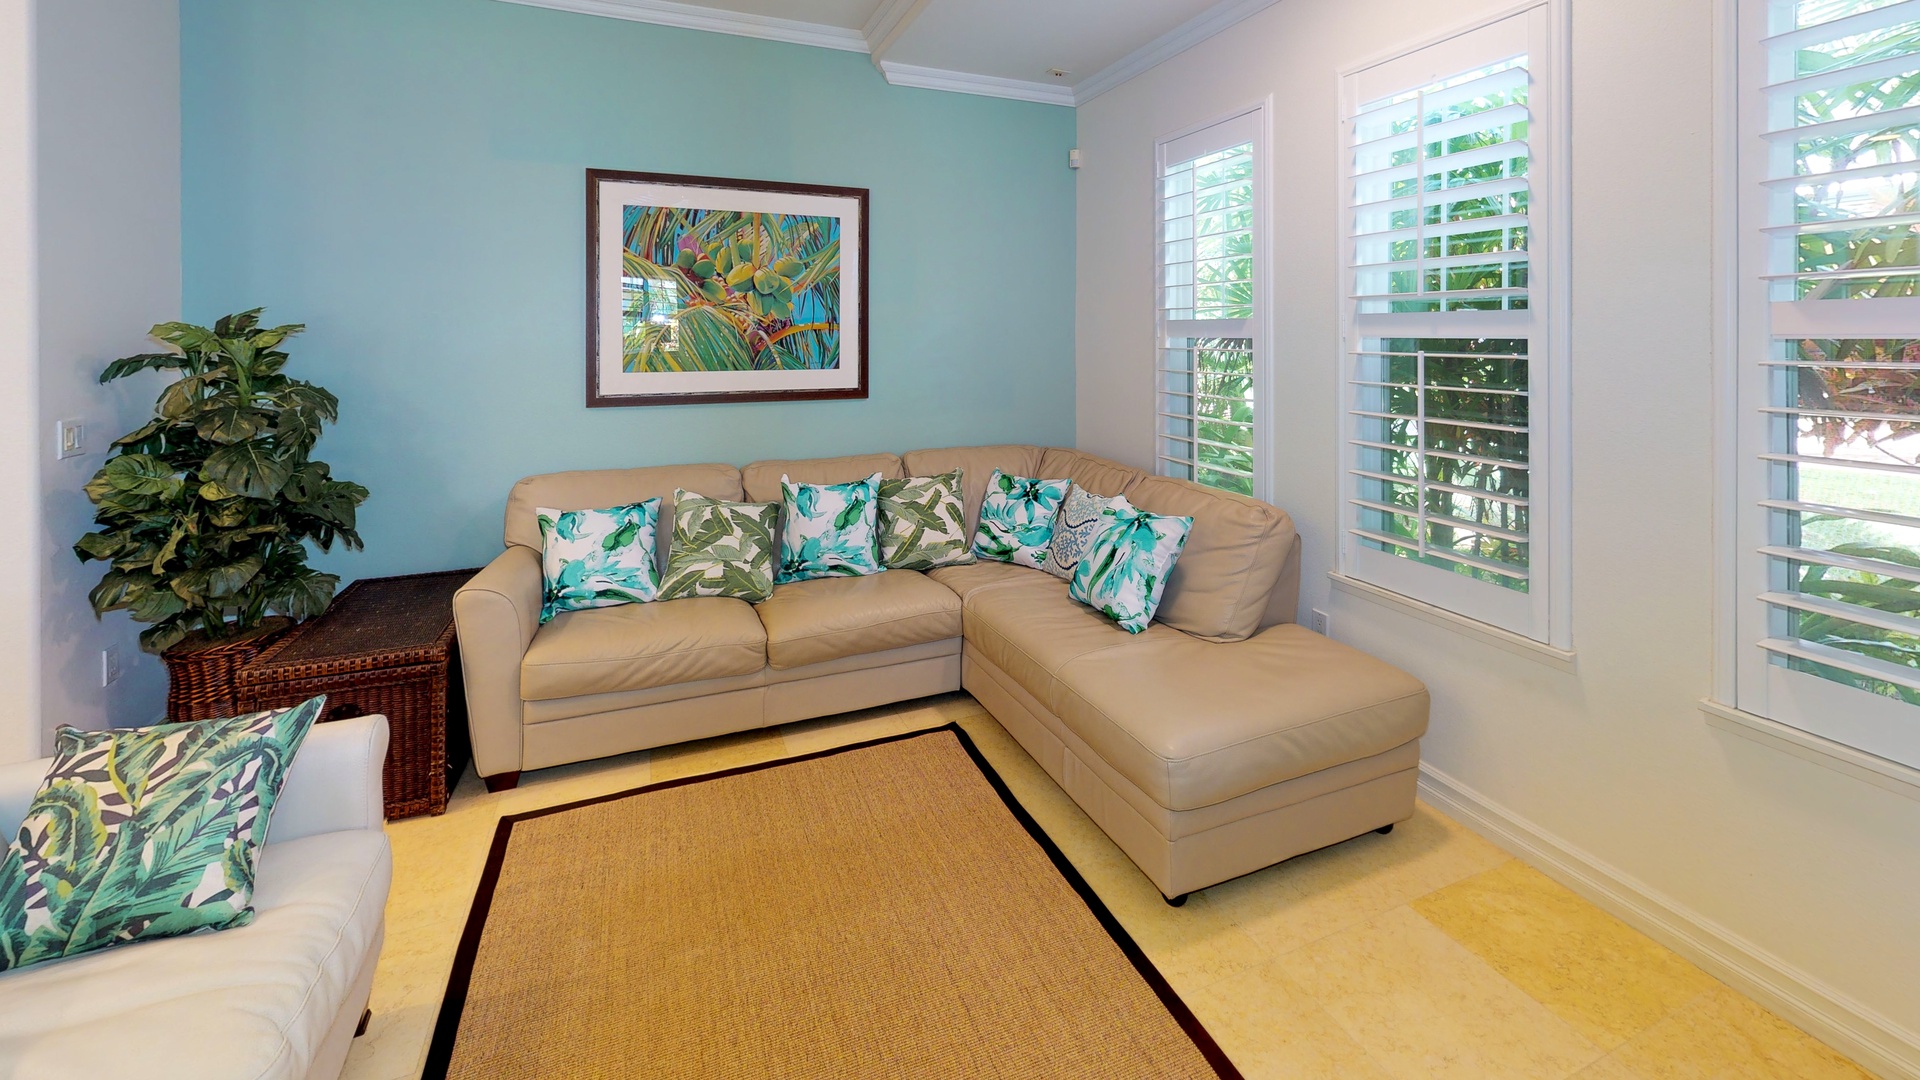 Kapolei Vacation Rentals, Coconut Plantation 1200-4 - The living area has plentiful seating for your group.